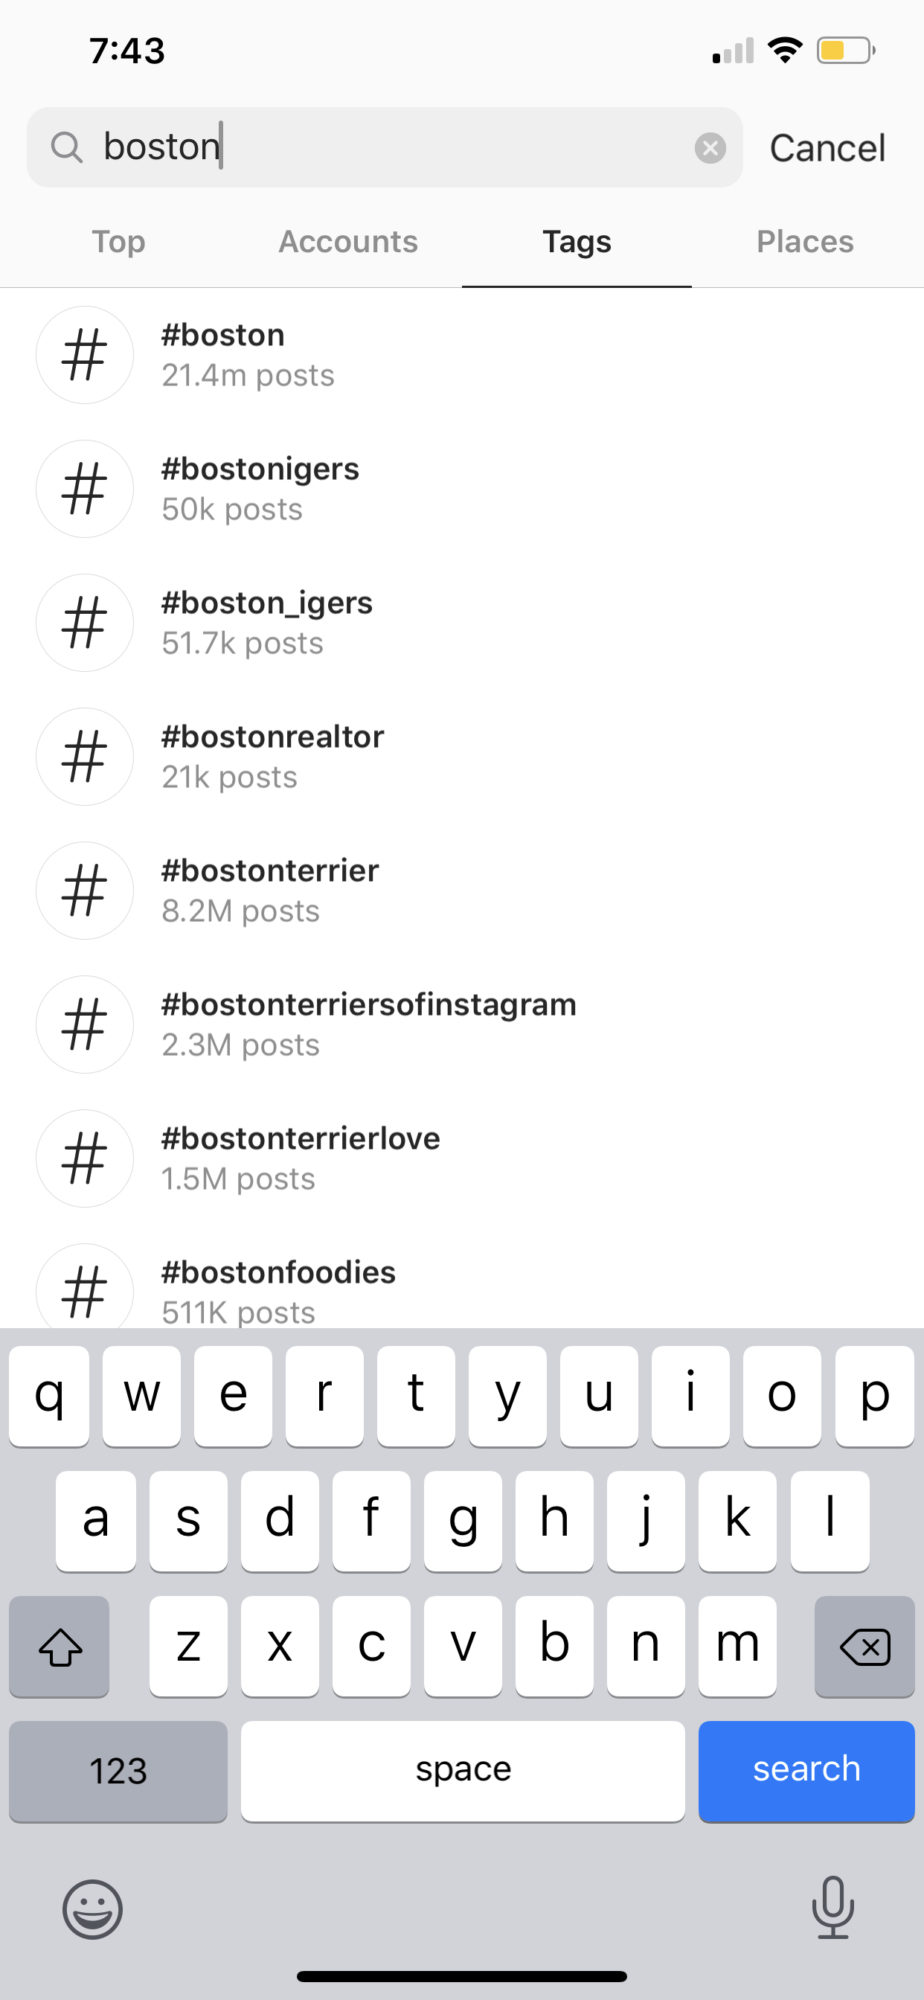 Instagram Hashtags for Followers by popular New England influencer, Shannon Shipman: screen shot image of a Instagram hashtag search.